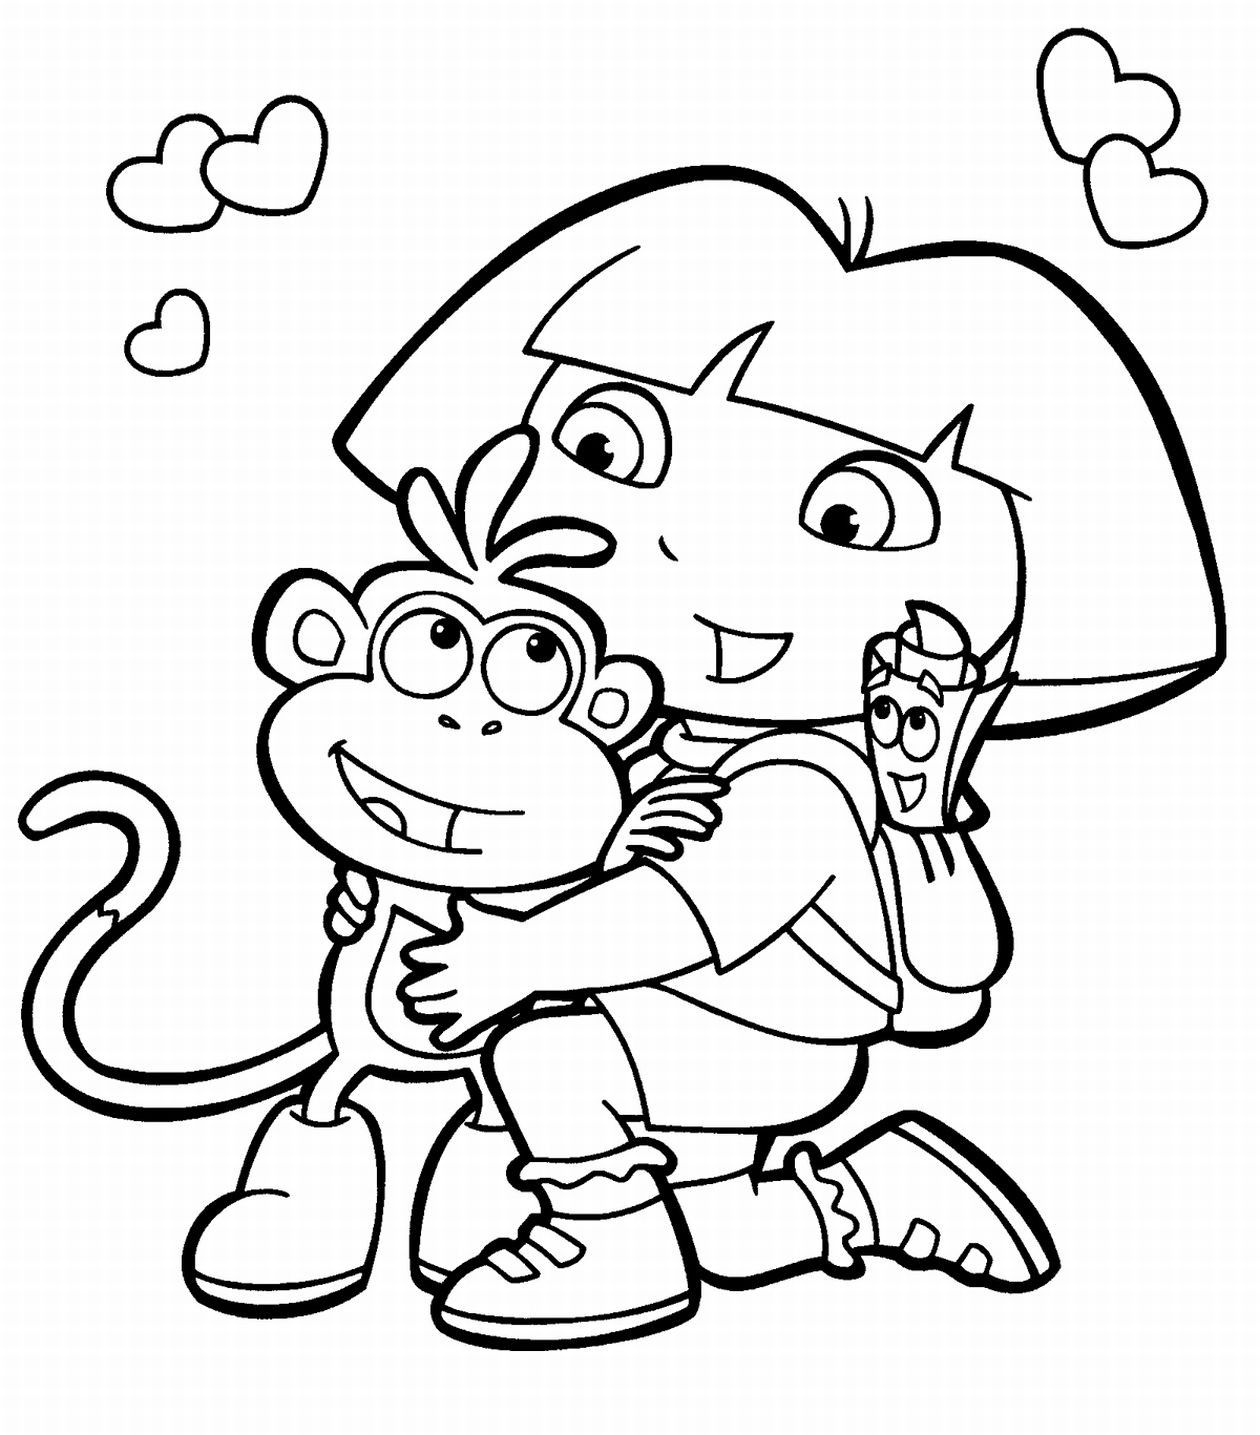 Free Printable Coloring Pages For Preschool   Coloring Home